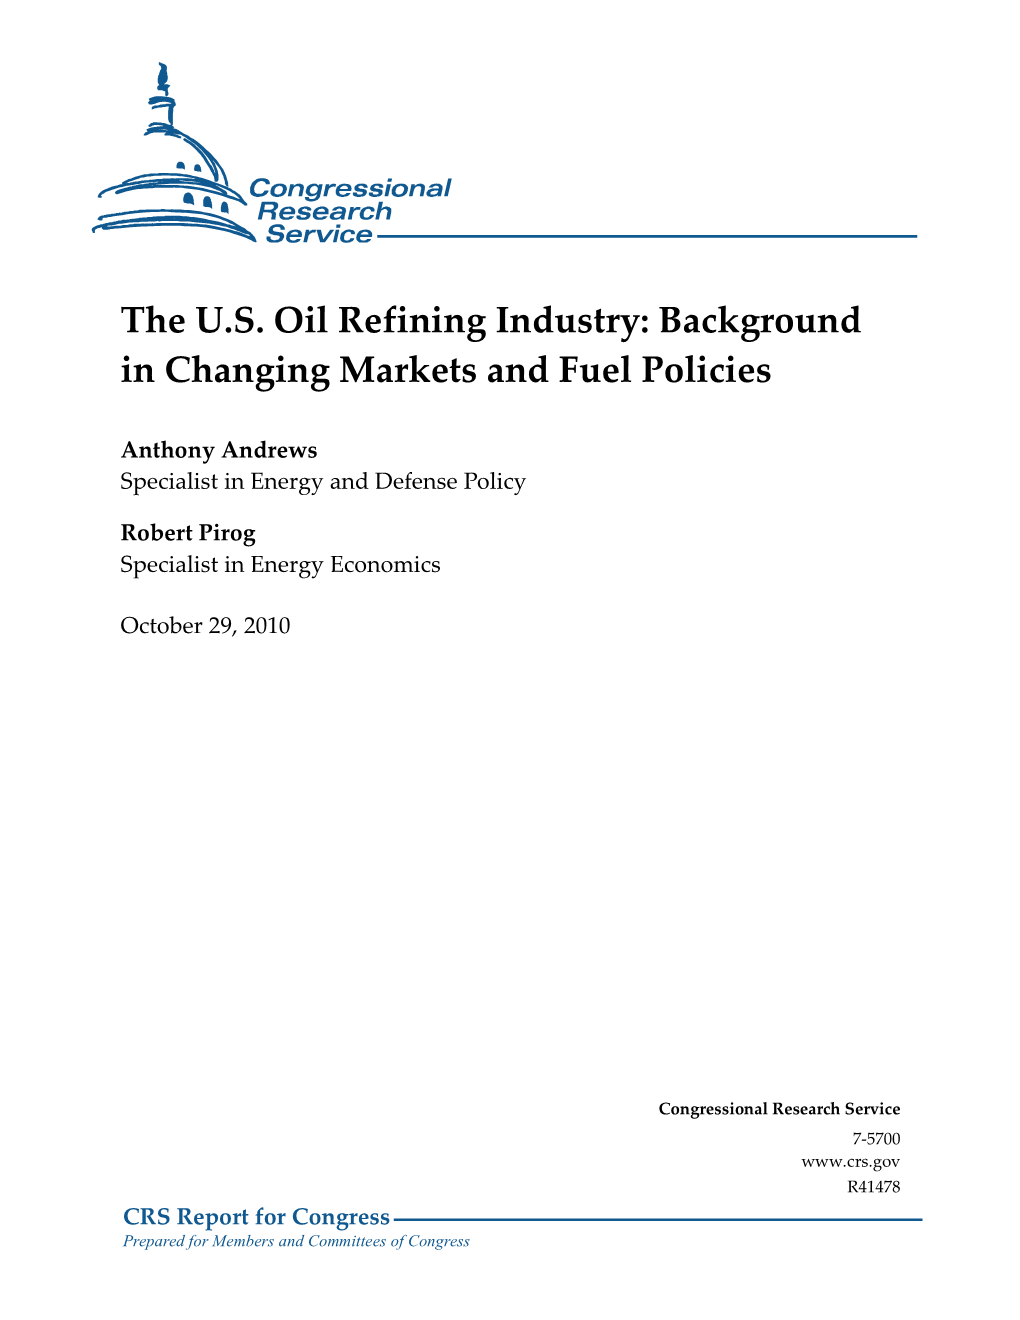 The U.S. Oil Refining Industry: Background in Changing Markets and Fuel Policies